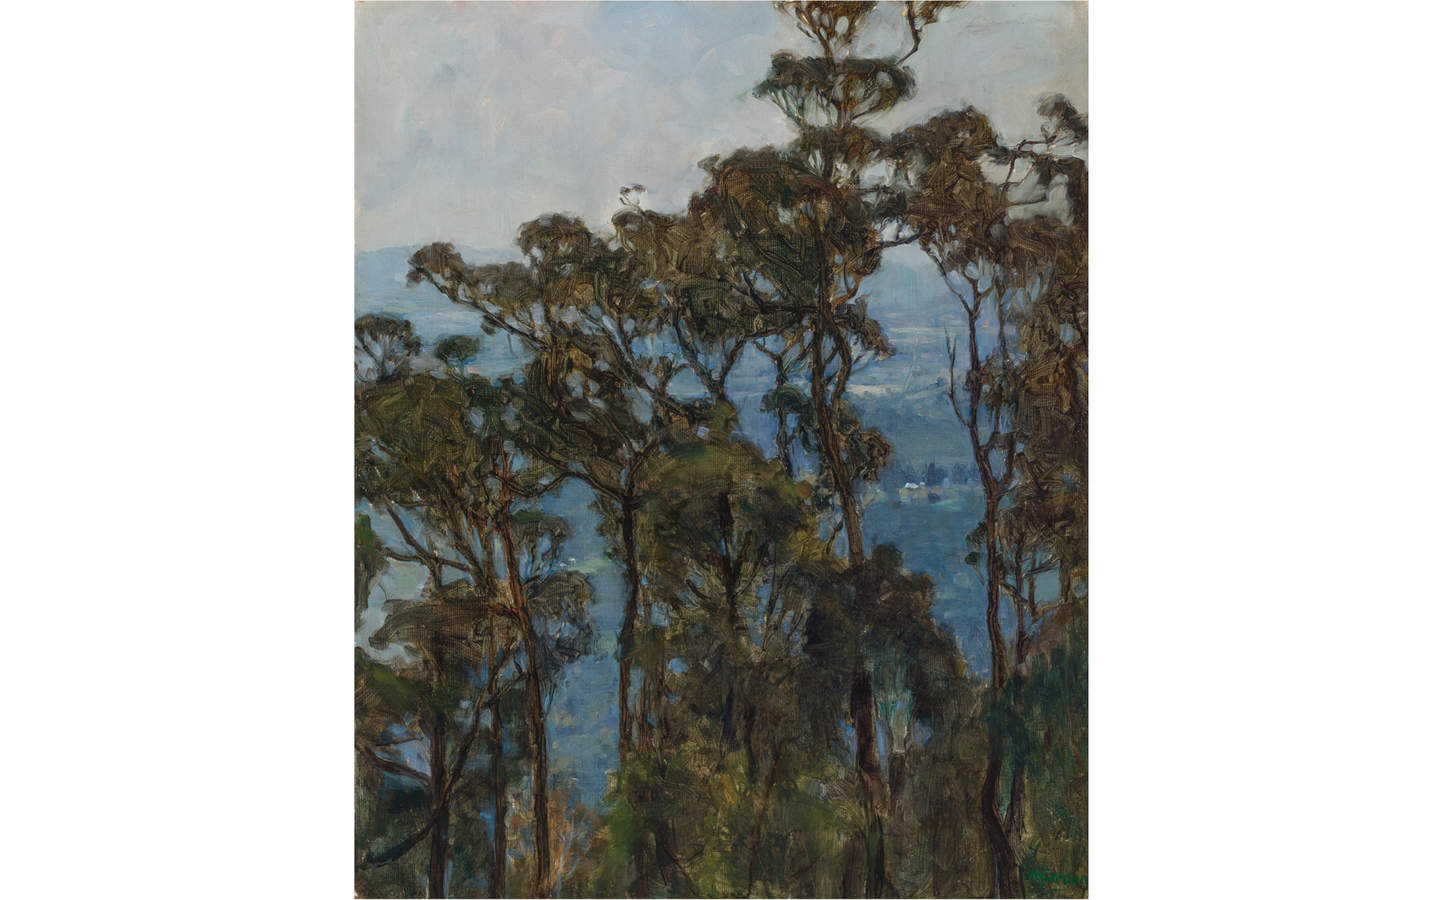 Landscape painting of large gum trees, through which views of the mountains in a blueish tone can be seen